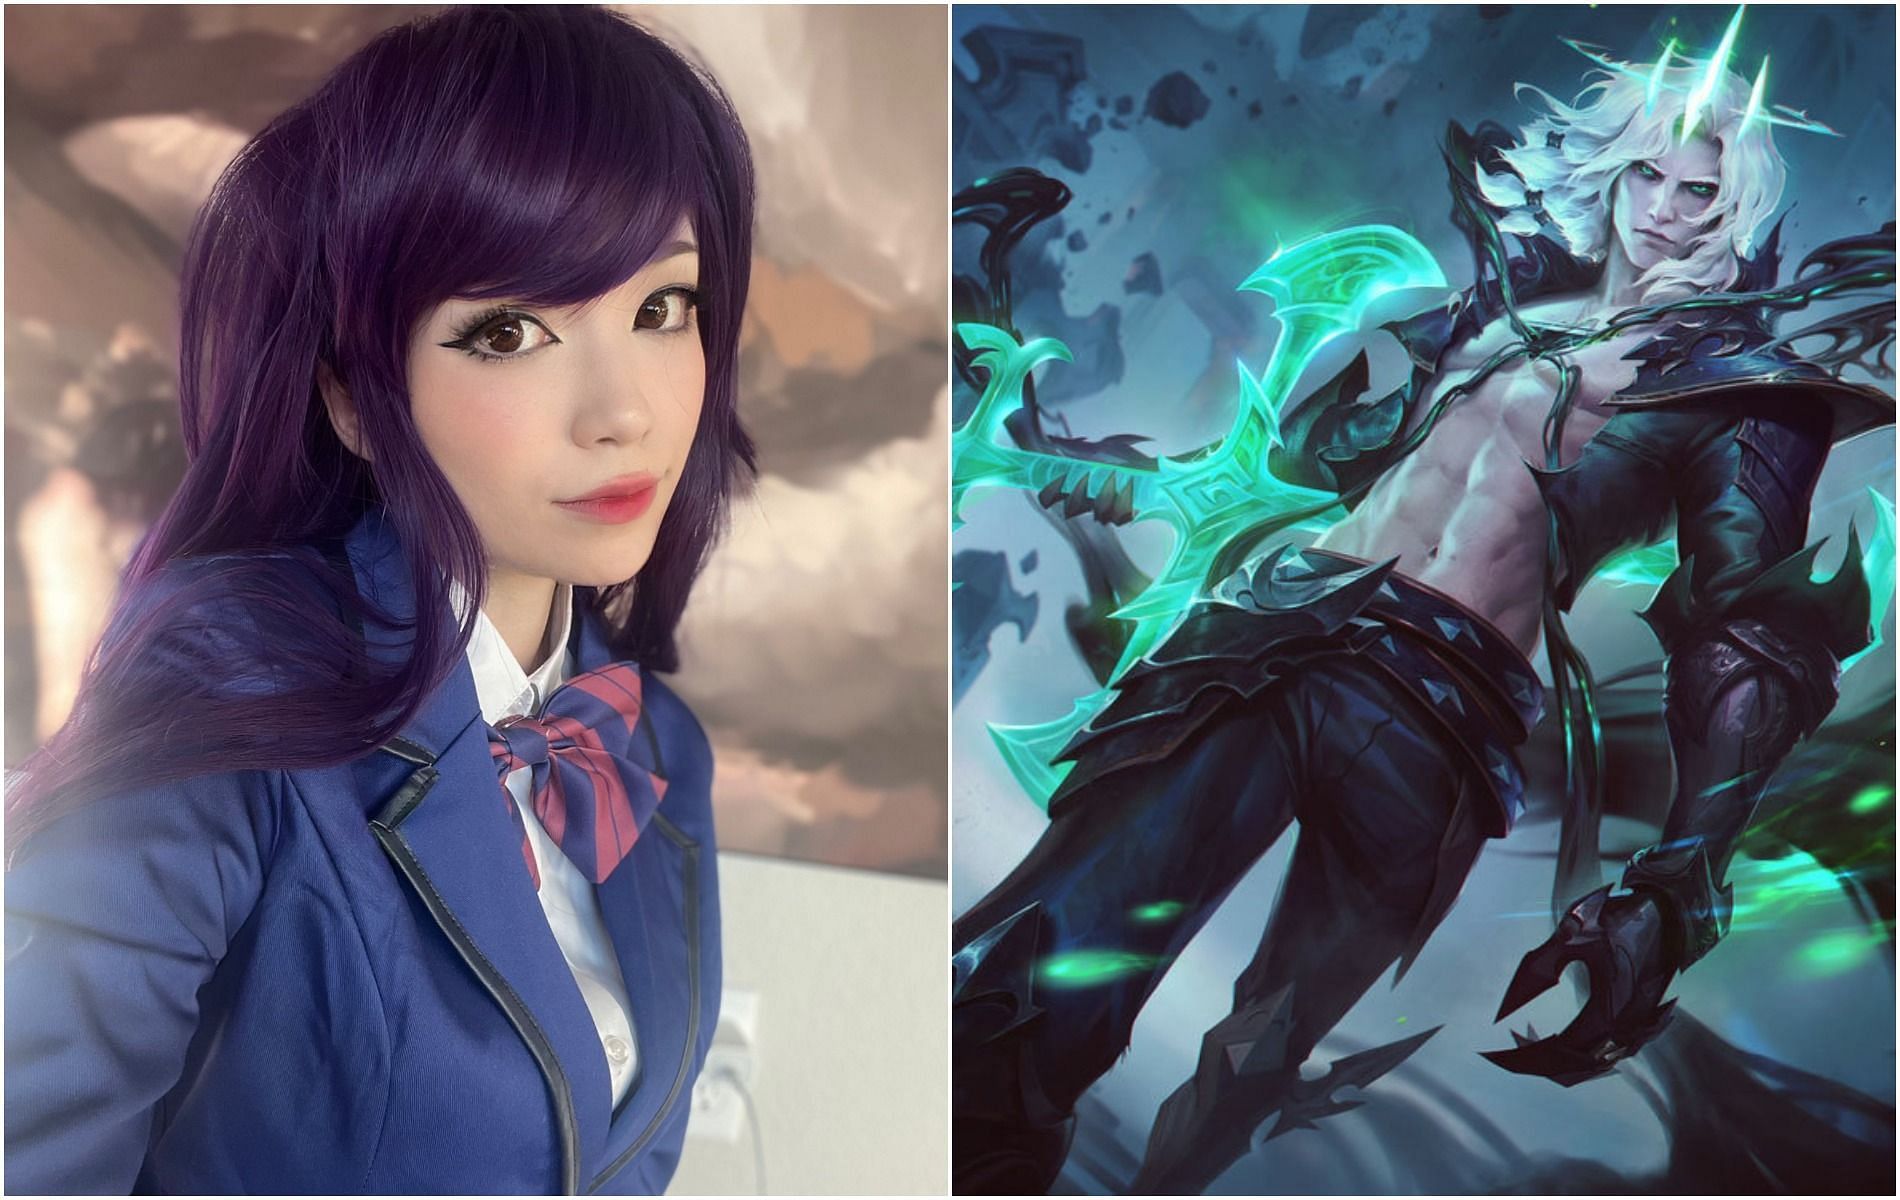 Emiru recently got destroyed by Viego in League of Legends, leading to a hilarious phone call, tags: twitch streamer riot - Image via Emiru/Twitter & League of Legends